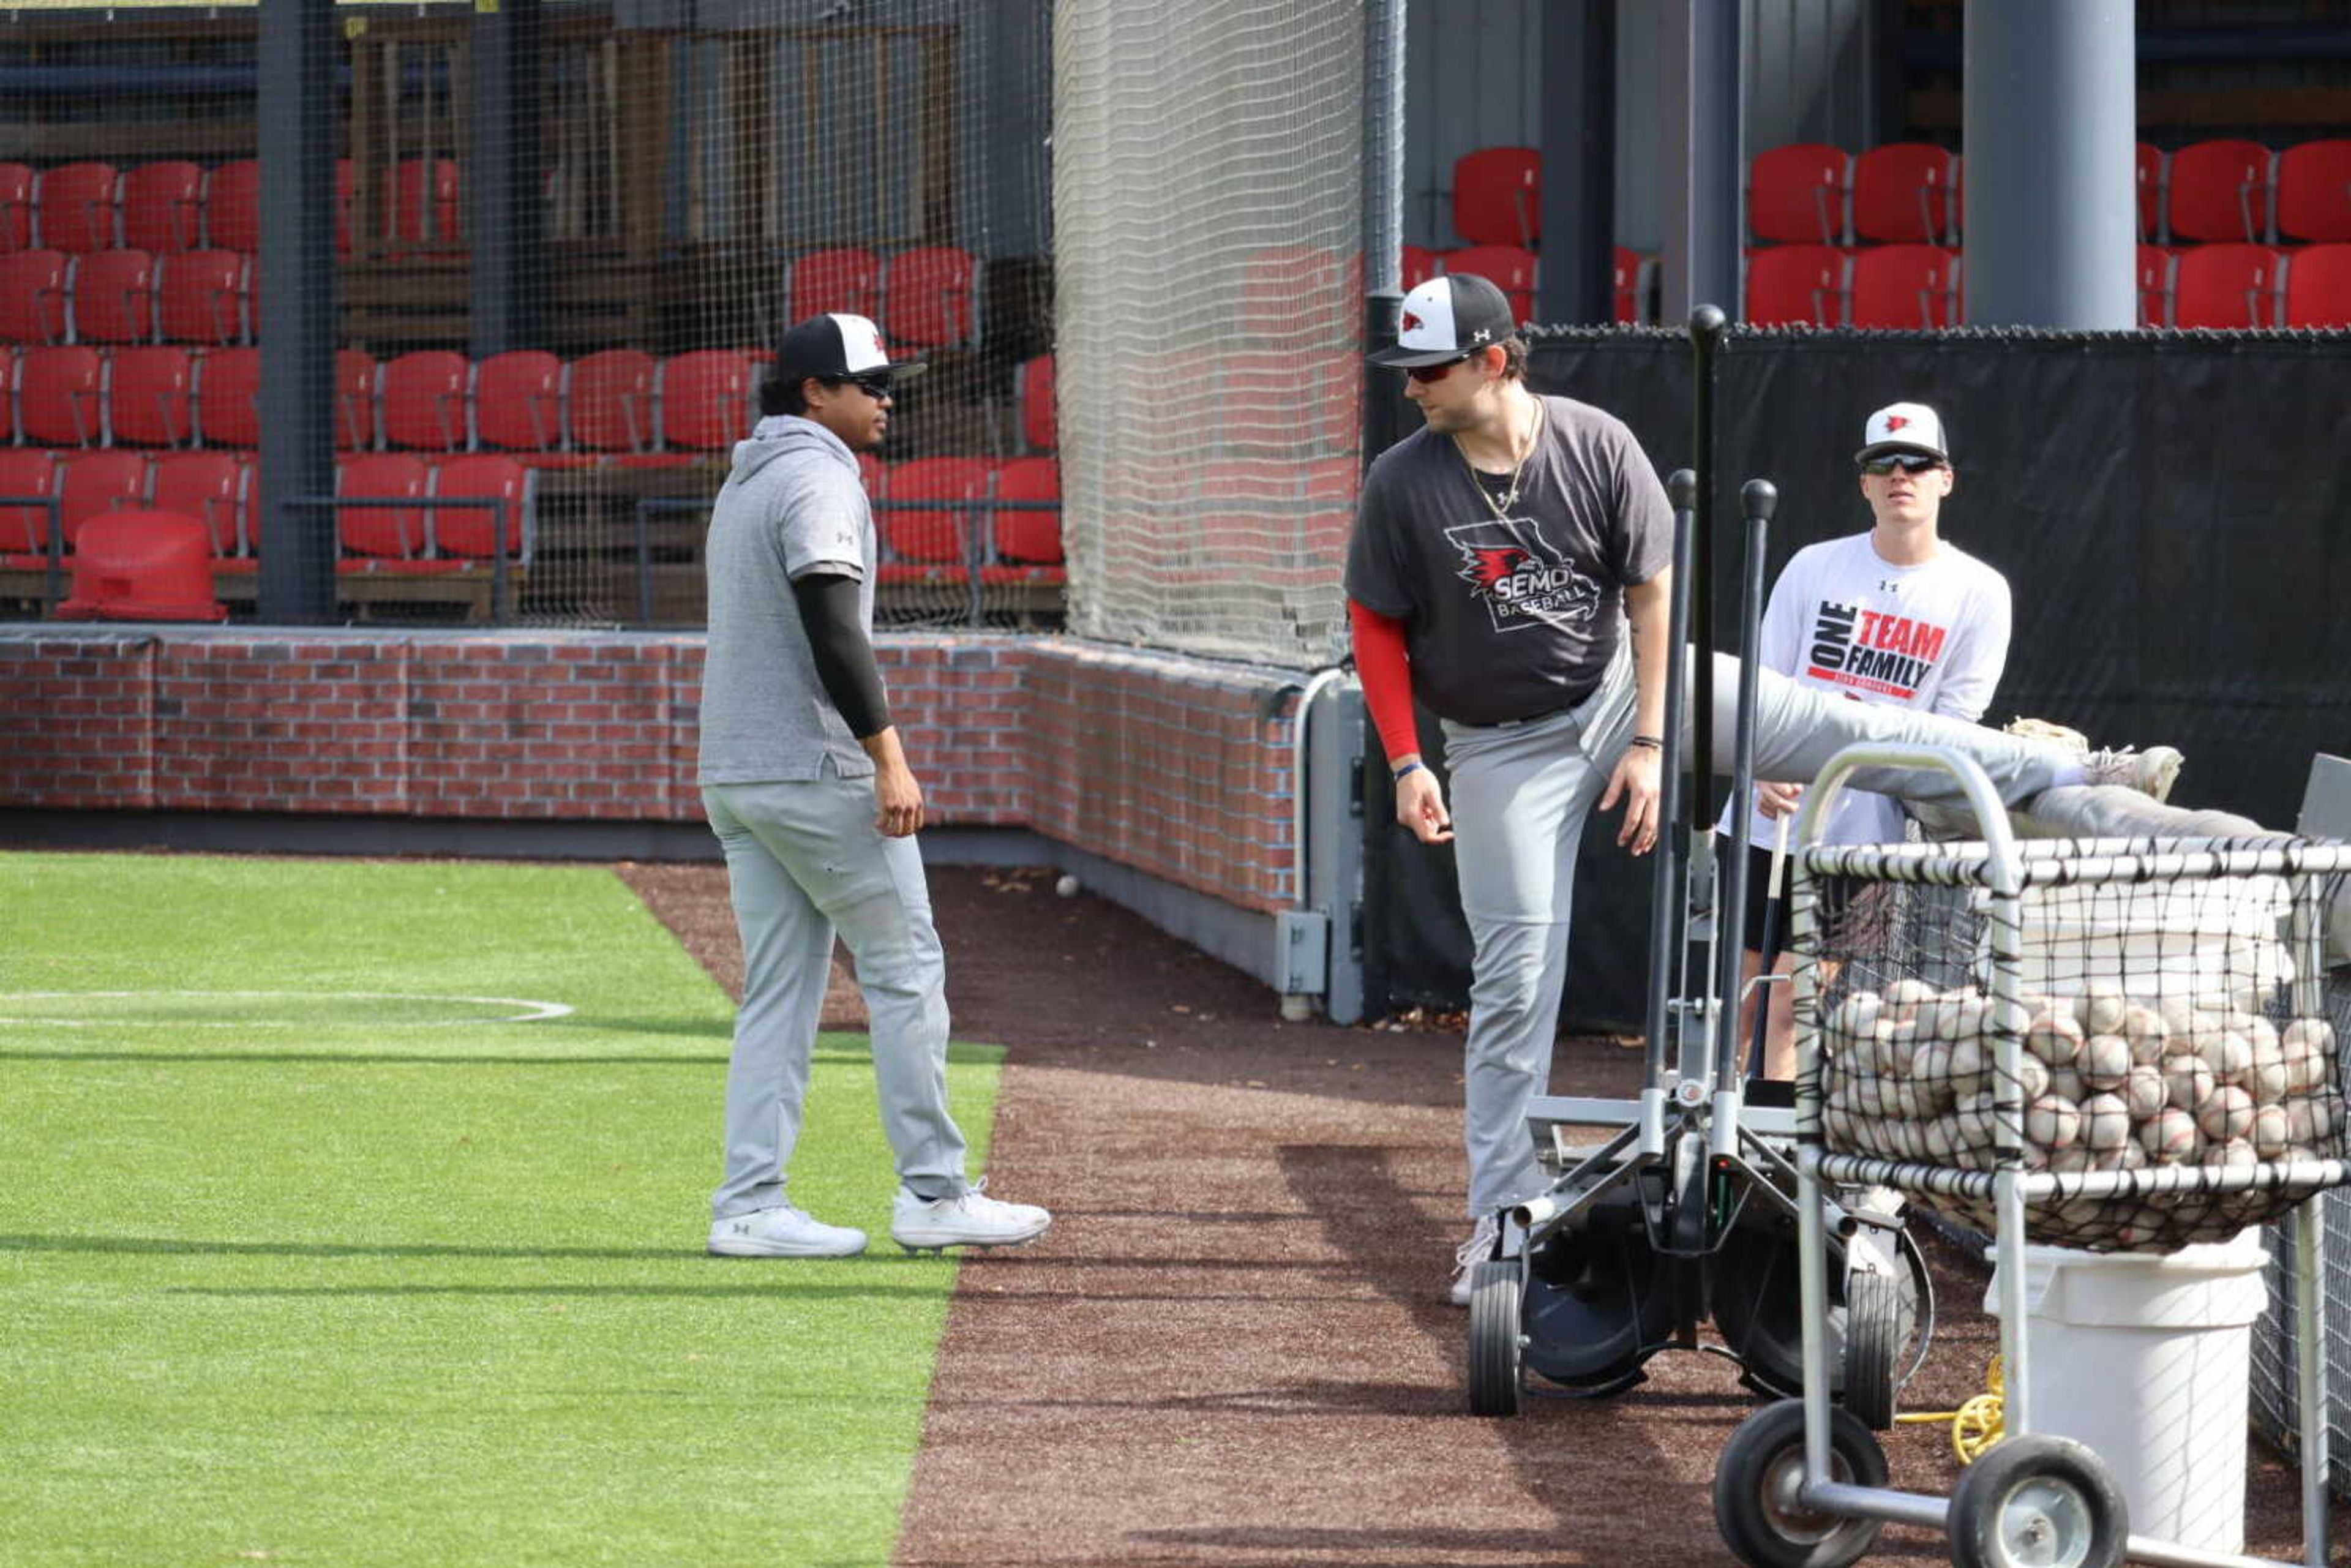 Senior outfielder Jevon Mason talks with teammates before practice. Mason was tied for second on the Redhawks last year in hits with 73 and third in home runs with 14.